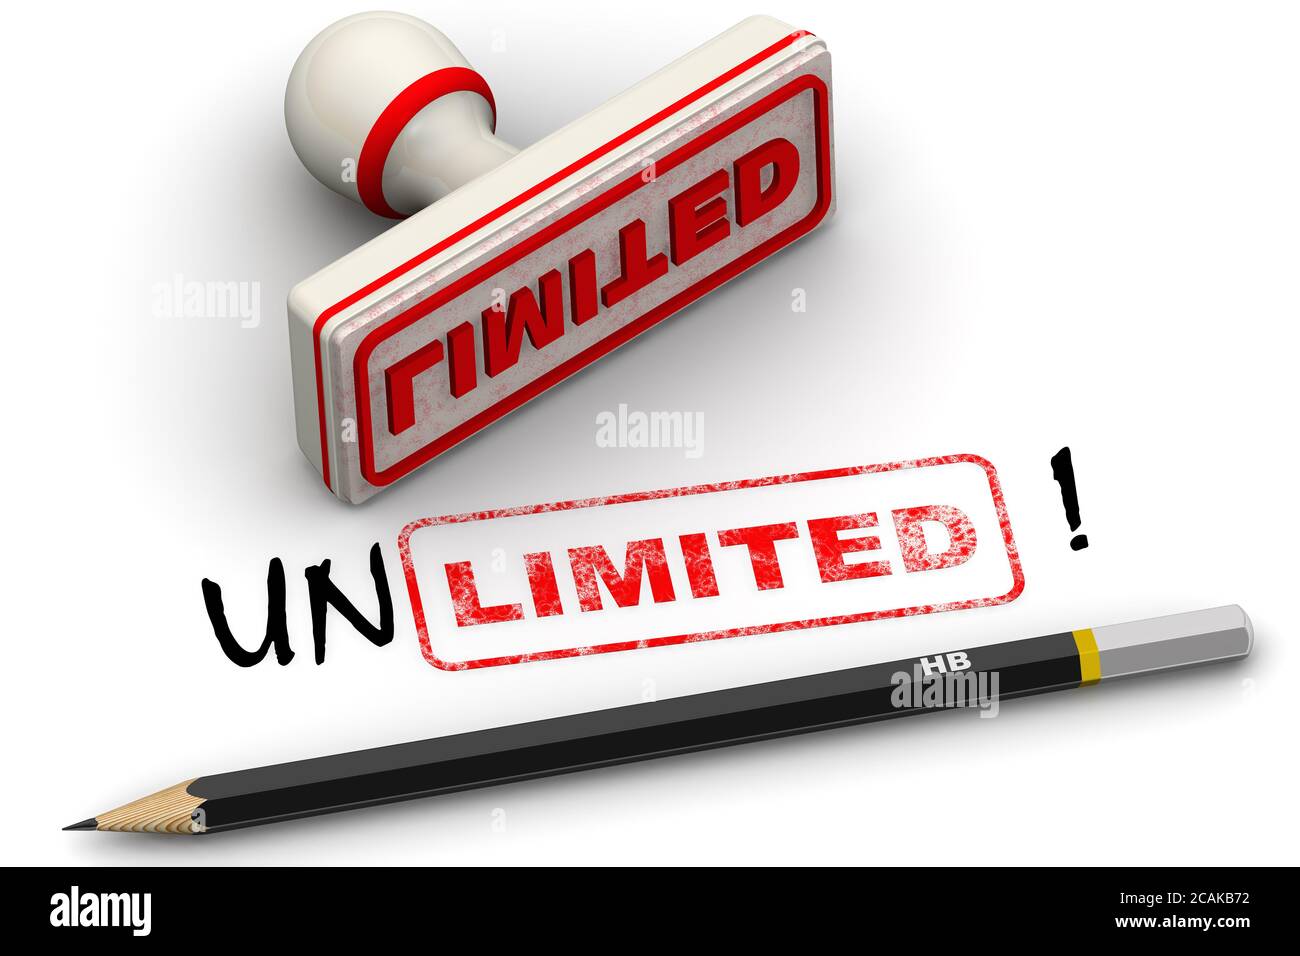 Unlimited! Corrected seal impression. White seal and red imprint LIMITED corrected to UNLIMITED! on white surface. 3D illustration Stock Photo